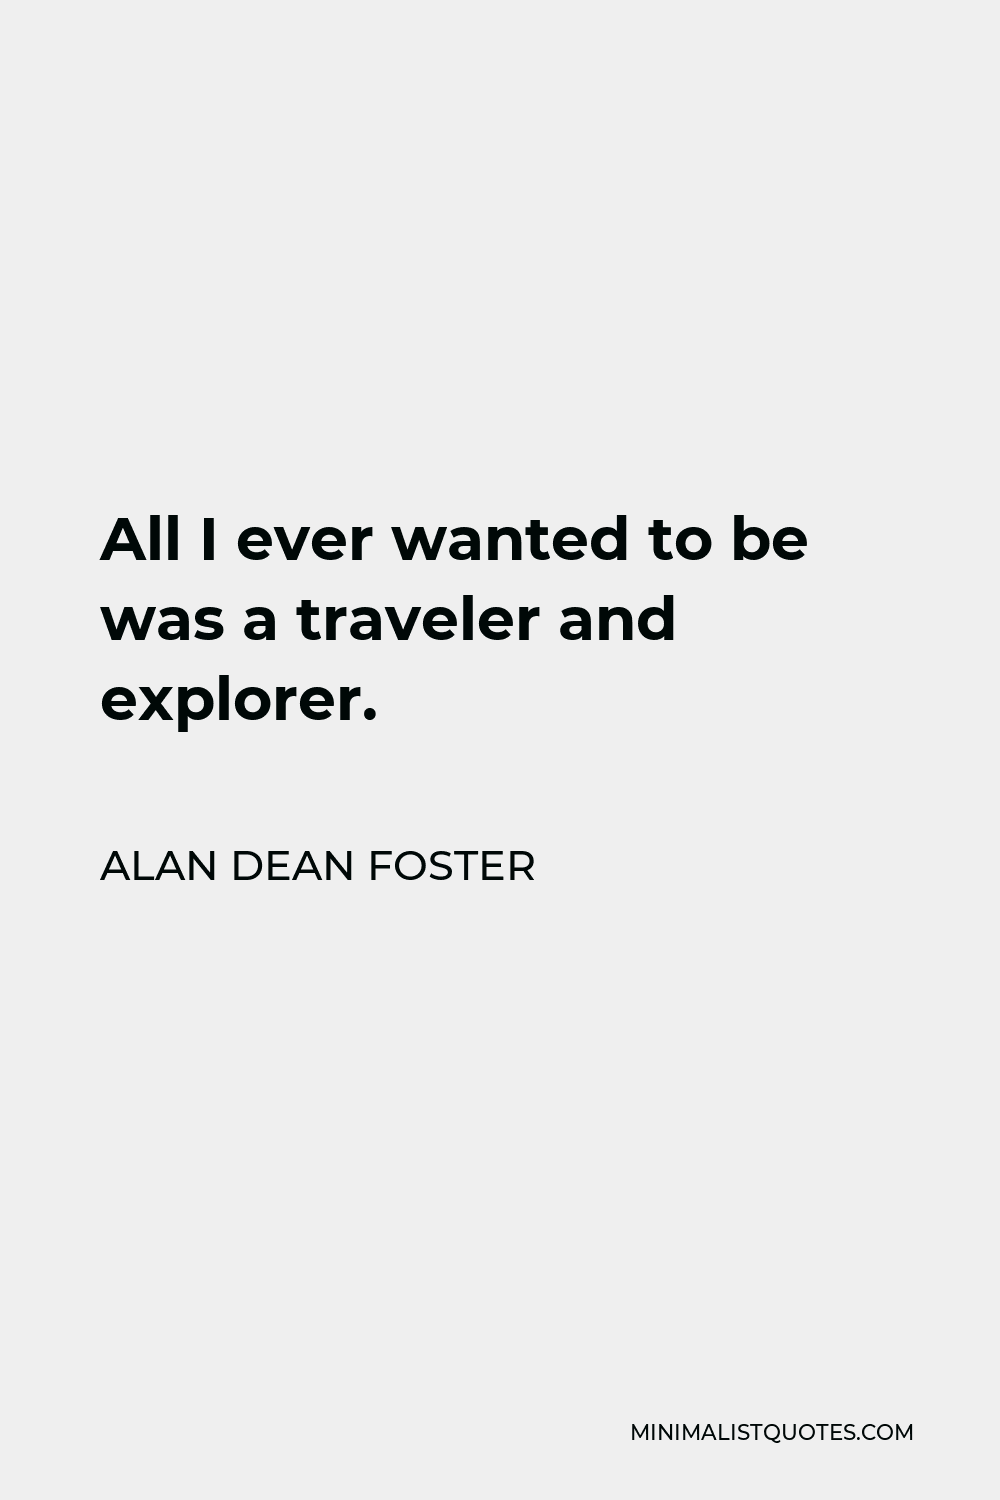 Alan Dean Foster Quote - All I ever wanted to be was a traveler and explorer.